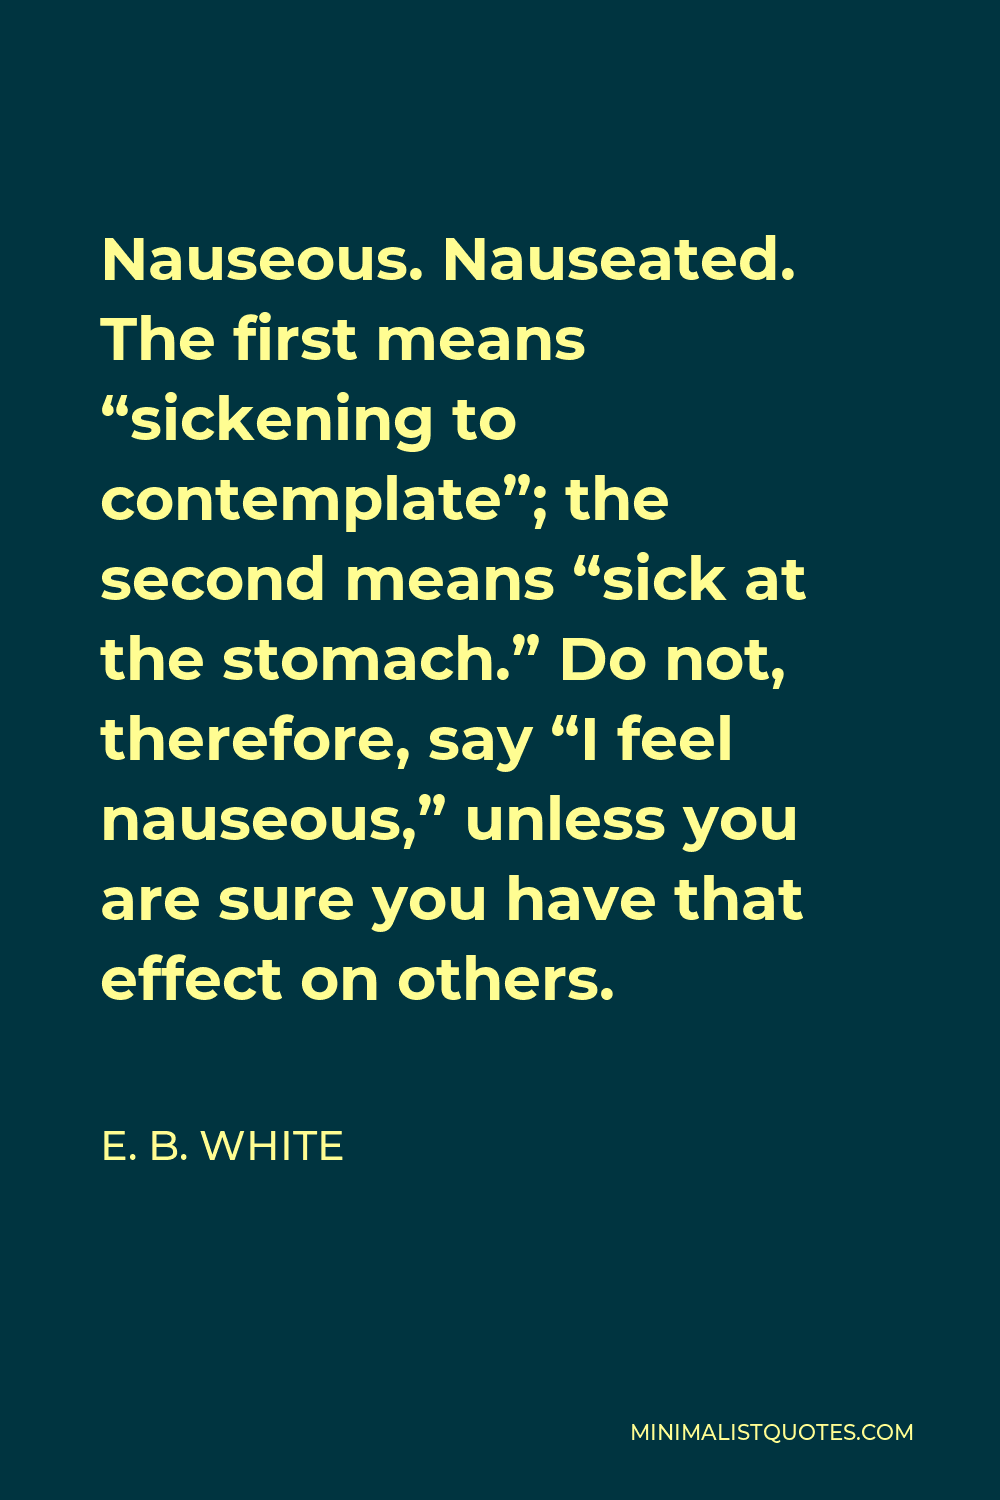 E. B. White Quote - Nauseous. Nauseated. The first means “sickening to contemplate”; the second means “sick at the stomach.” Do not, therefore, say “I feel nauseous,” unless you are sure you have that effect on others.